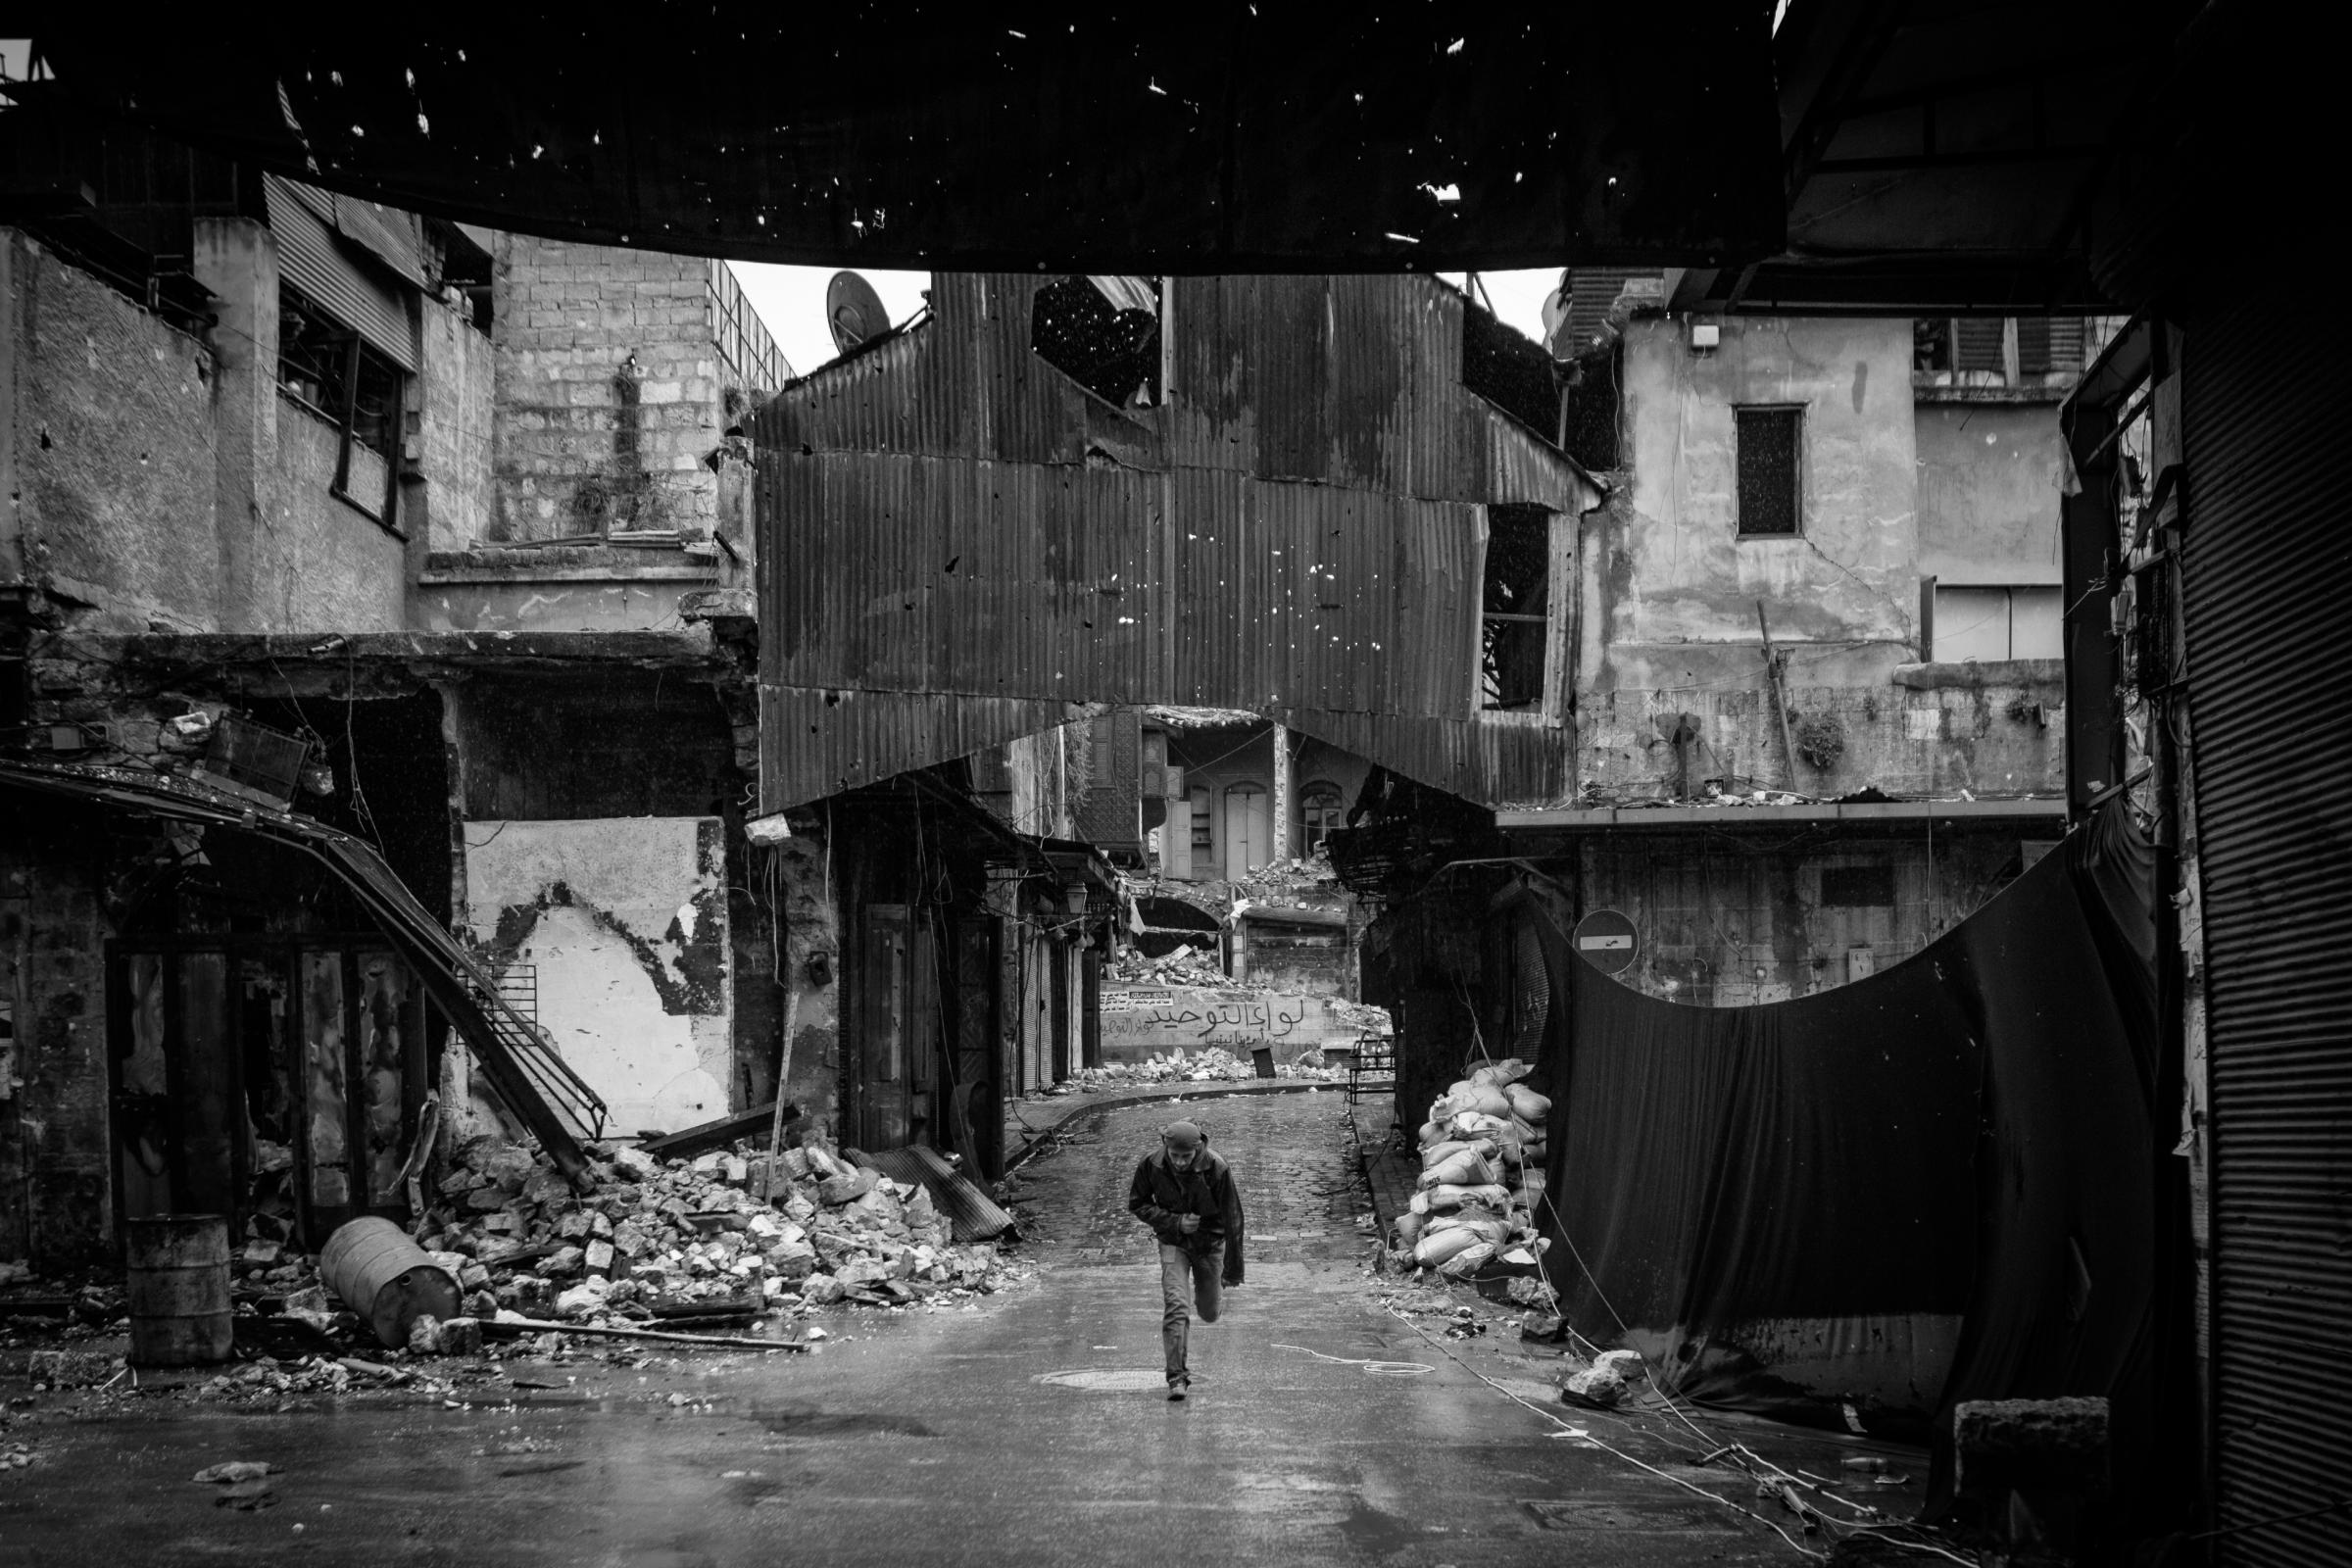 A Free Syrian Army soldier runs while being shot at by Assad's snipers in Aleppo, Syria, on Jan. 7, 2013.